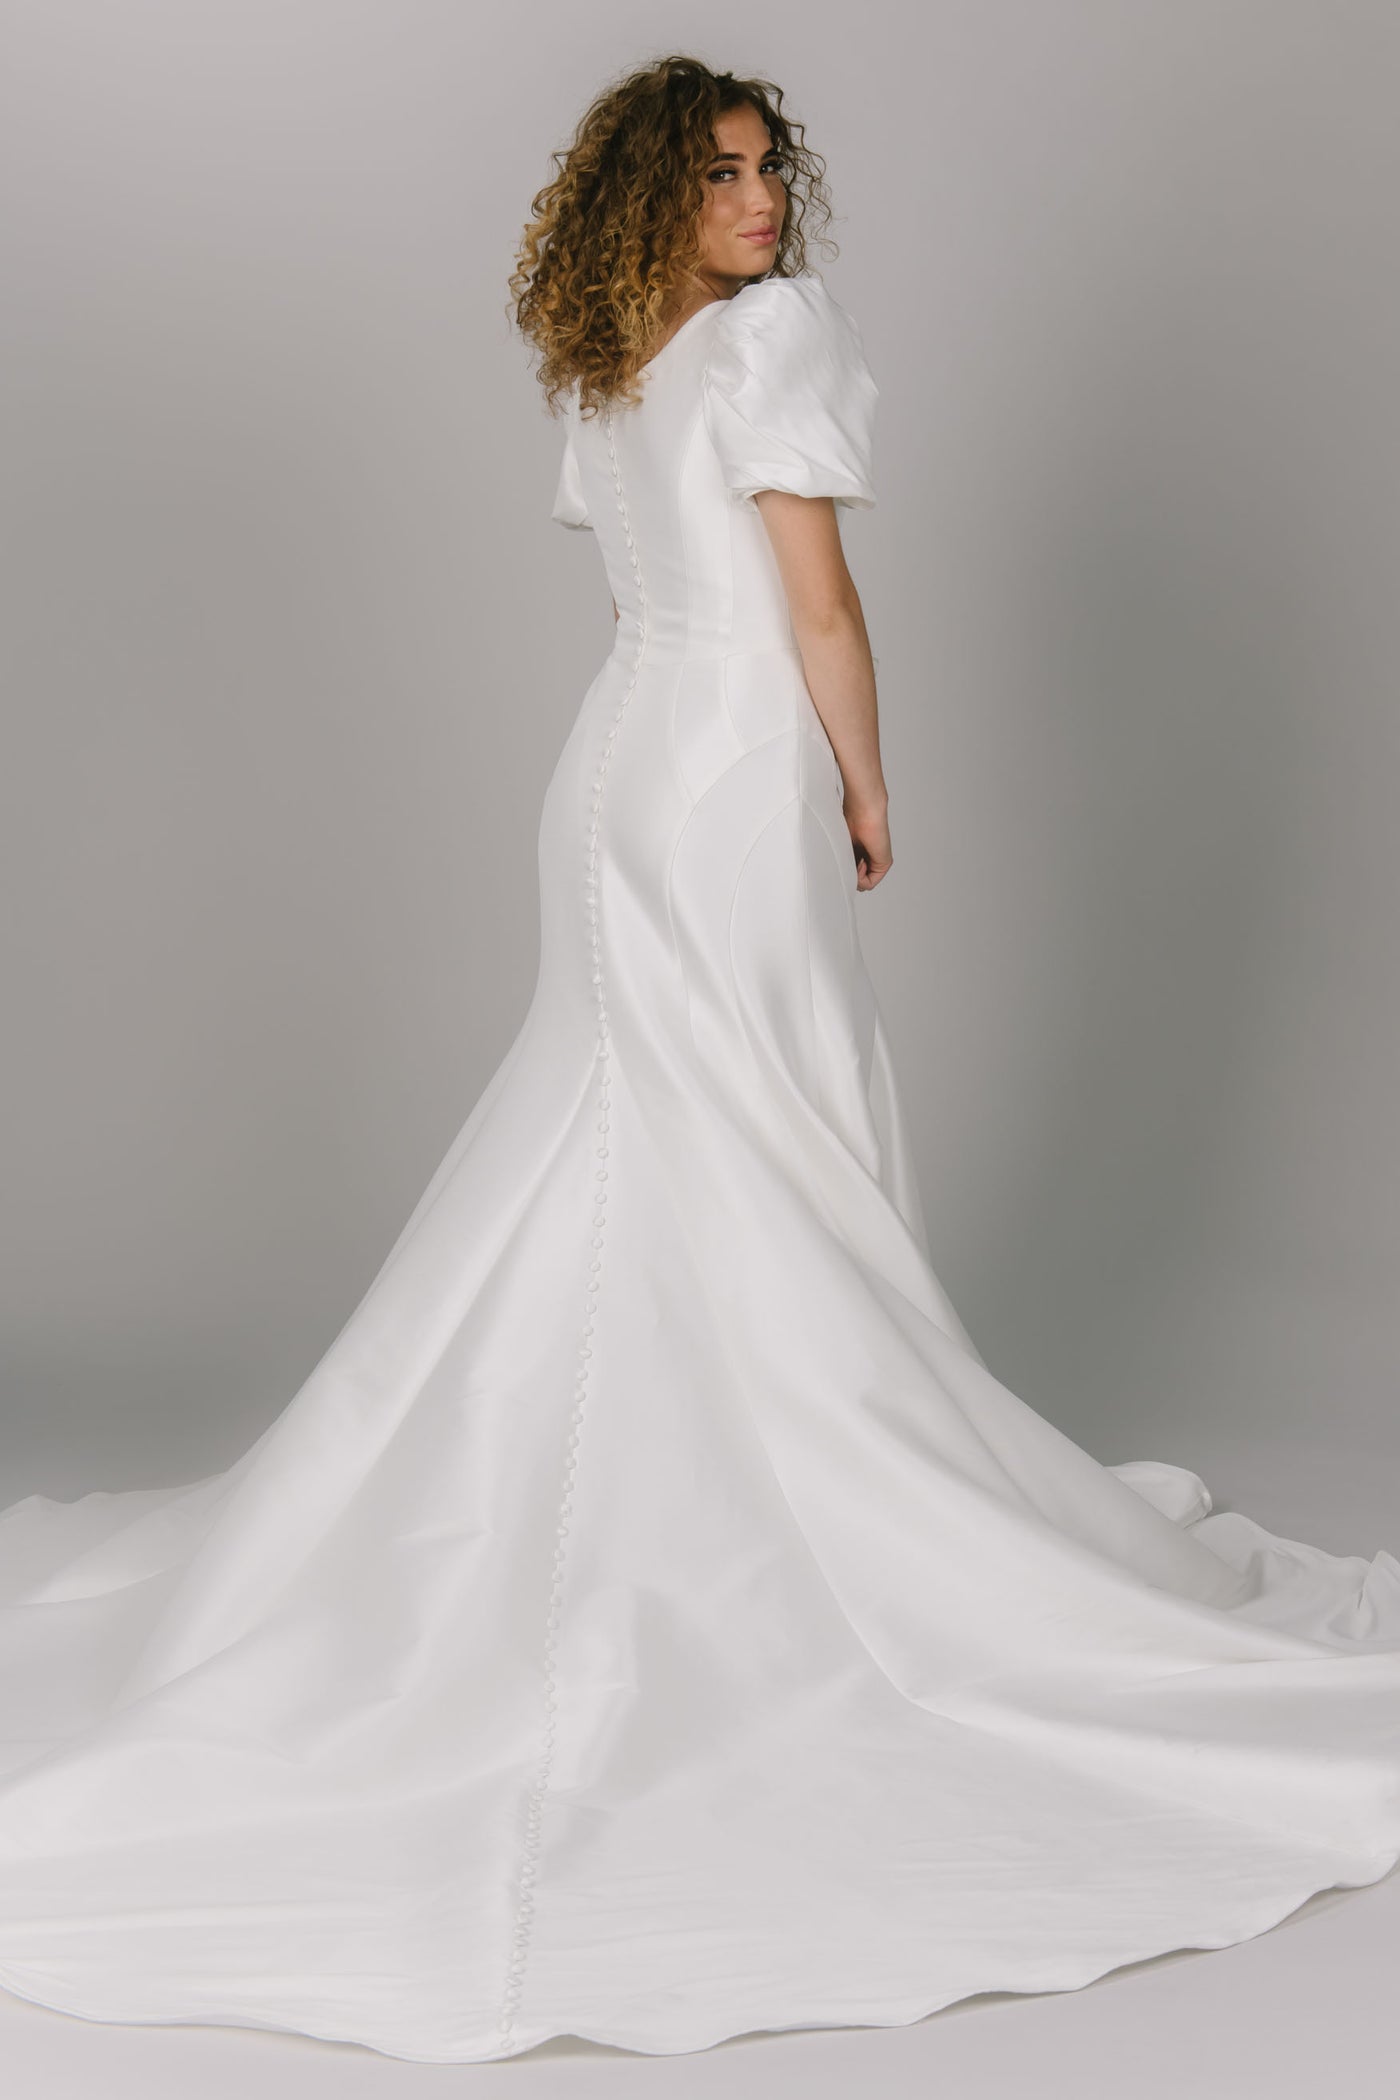 Back view of modest wedding dress with contour lines. It is a fitted dress with puffed sleeves. This dress has a scoop neckline and is a gorgeous modest wedding gown.